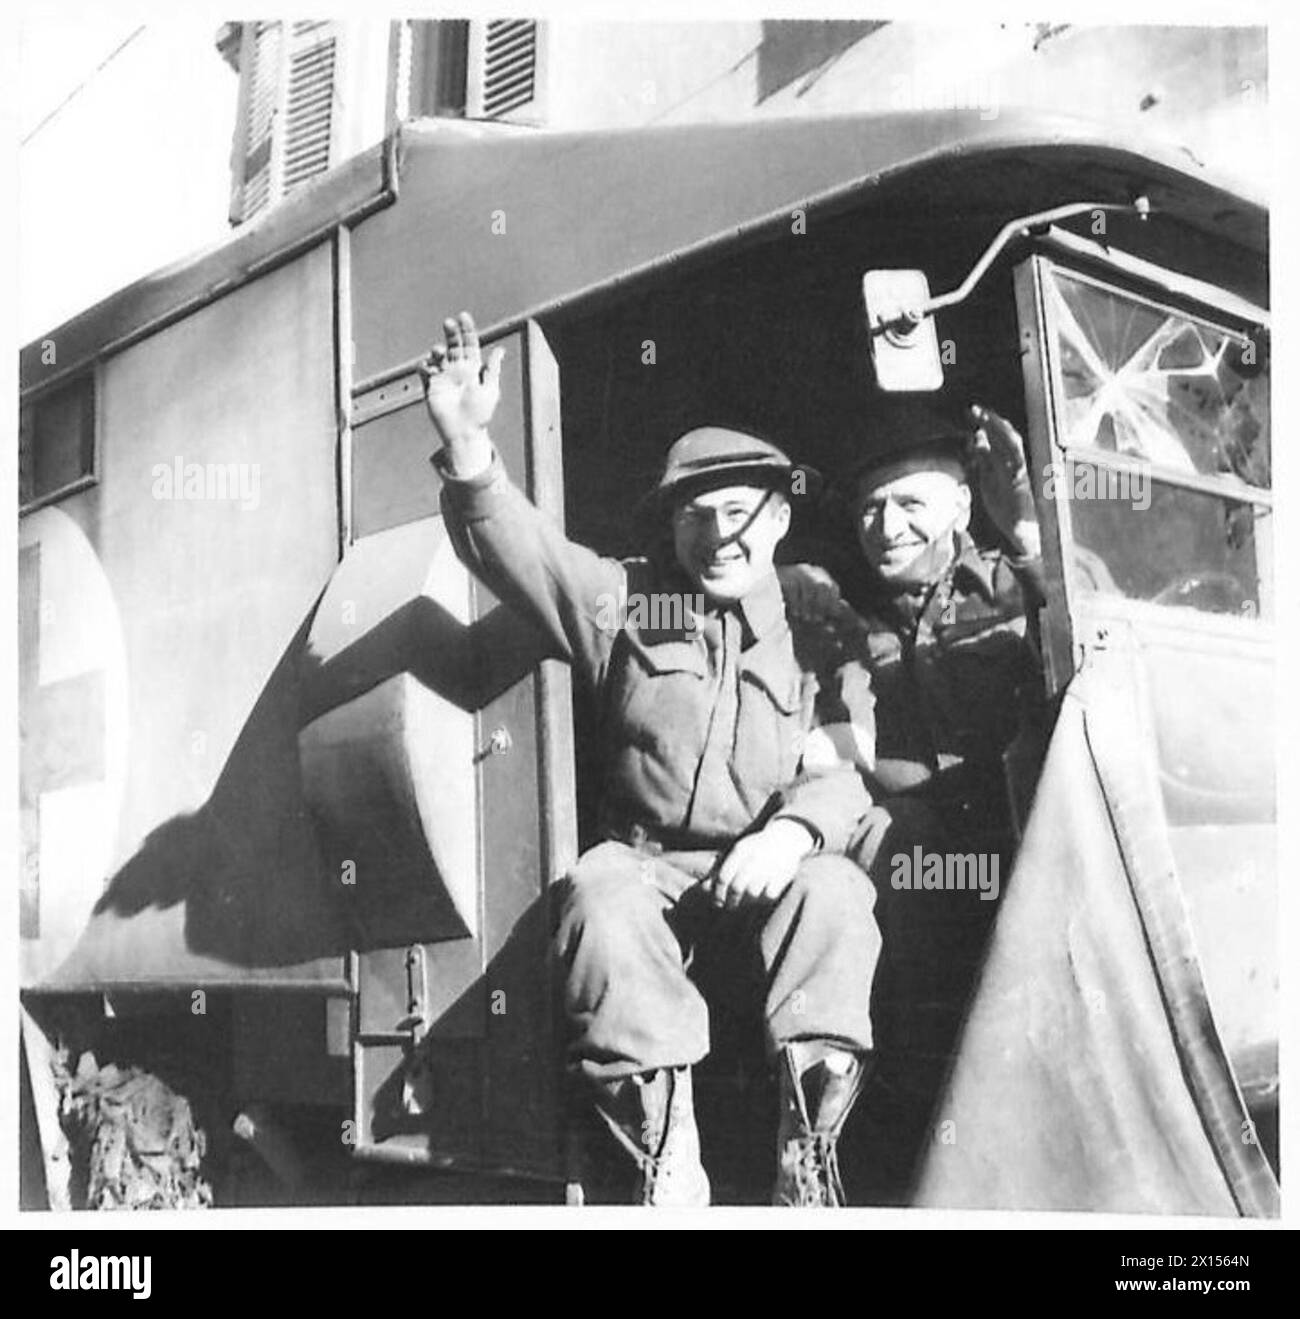 THE BRITISH ARMY IN NORTH AFRICA, SICILY, ITALY, THE BALKANS AND AUSTRIA 1942-1946 - Pte. Clarence Robichaud of St. Paul, New Brunswick, and Cpl. Tom Oddie of Hamilton, who drive an ambulance at the front, are great pals. Pte. Robichaud who is now 19 years of age enlisted when he was 16, and Cpl. Oddie, who will not divulge his age, is thought to be the oldest serving member in the Division British Army Stock Photo